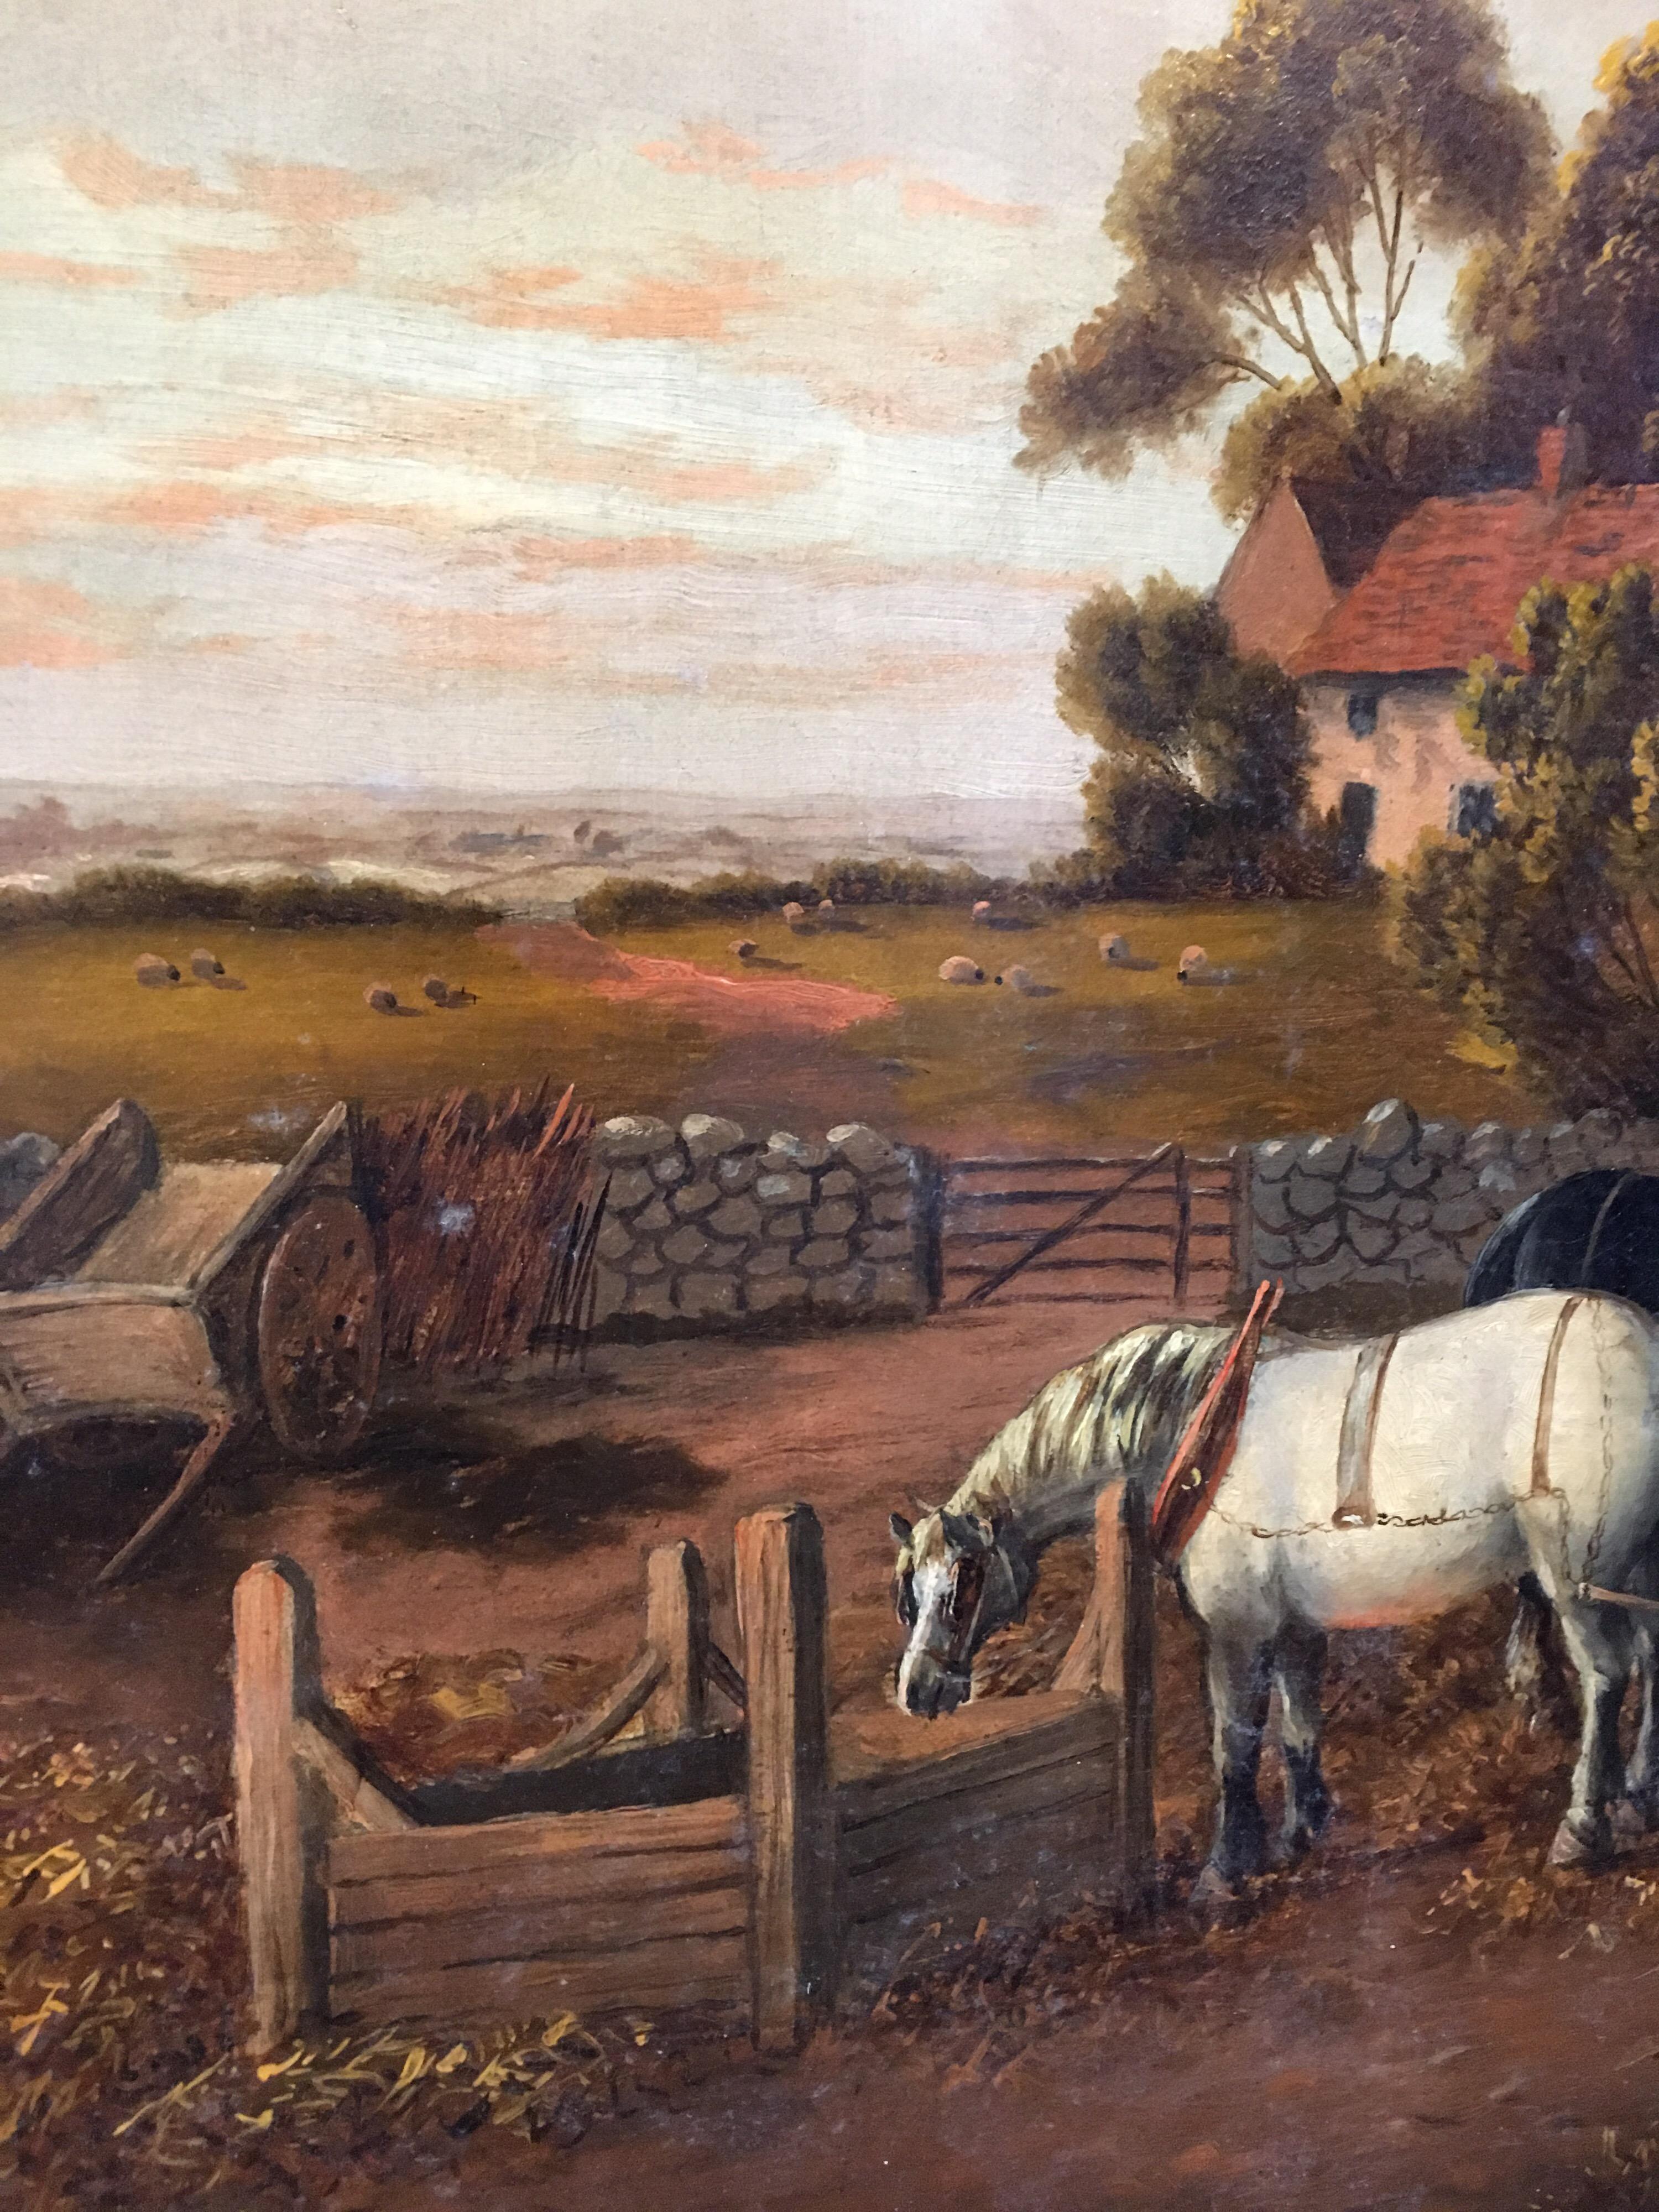 Farmer on his Land, Antique Victorian Landscape, Signed Original Oil
By British artist JB Cook, late 19th Century
Signed by the artist on the lower right hand corner
Oil painting on canvas, framed
Frame size: 35 x 54 inches

Cook is a well-known